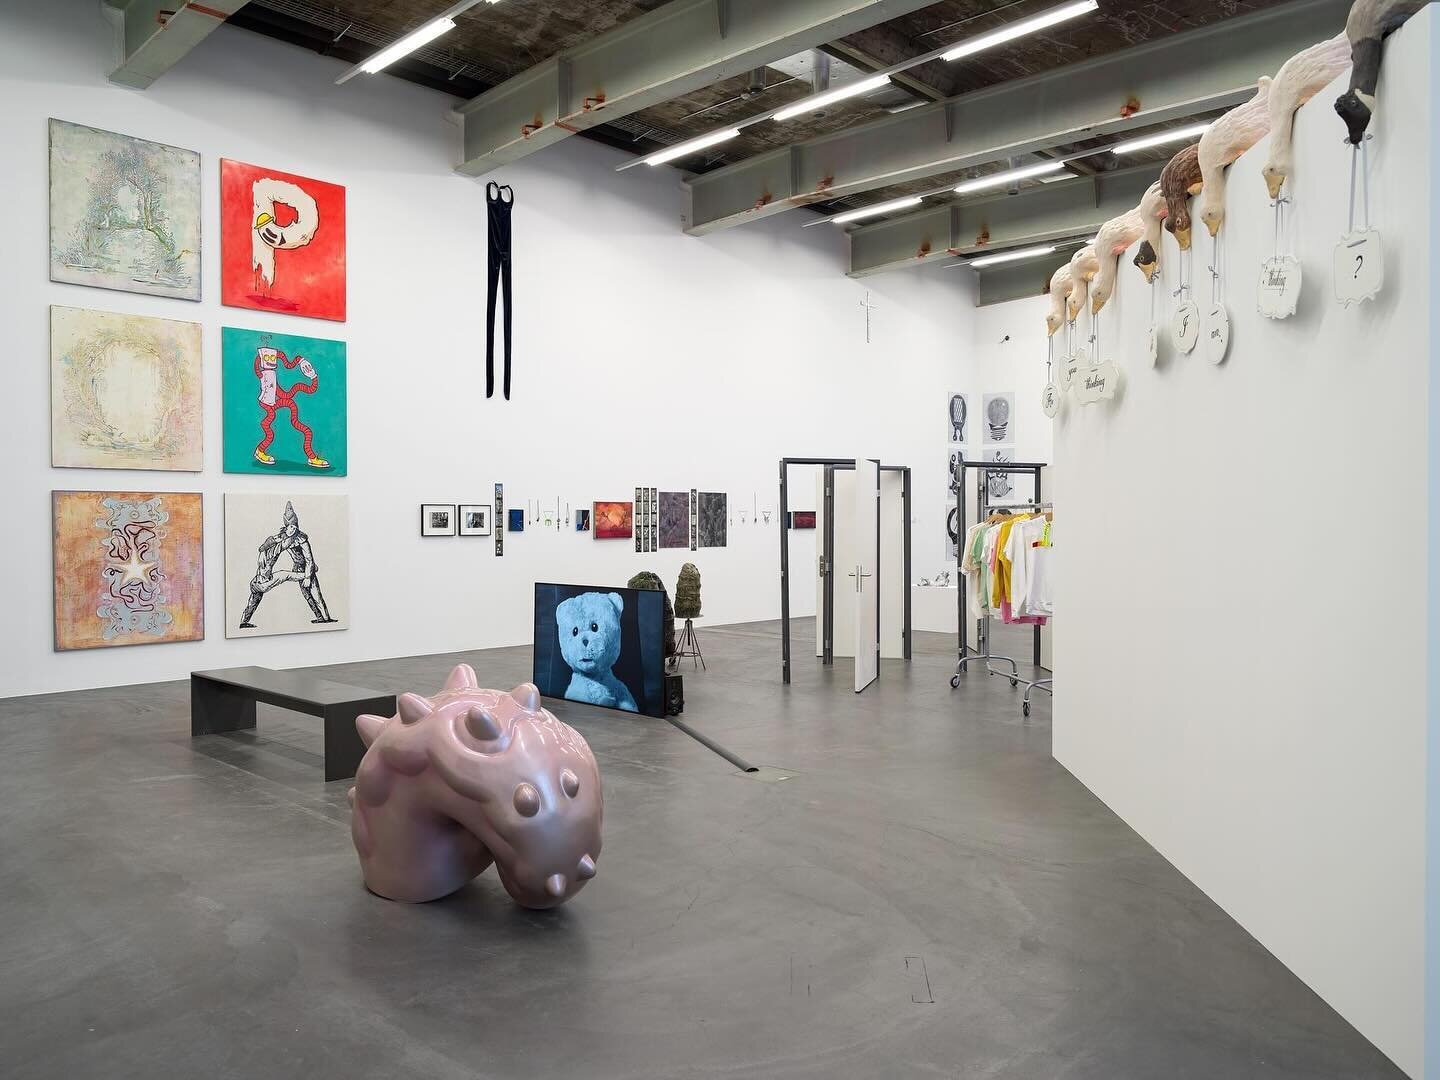 Frode Felipe Schjelderup is part of the Z&uuml;rich Biennial on display at Kunsthalle Z&uuml;rich. The exhibition will run until January 21, 2024.

The exhibition is curated by Mitchell Anderson, artist and founder of Plymouth Rock, and Daniel Bauman